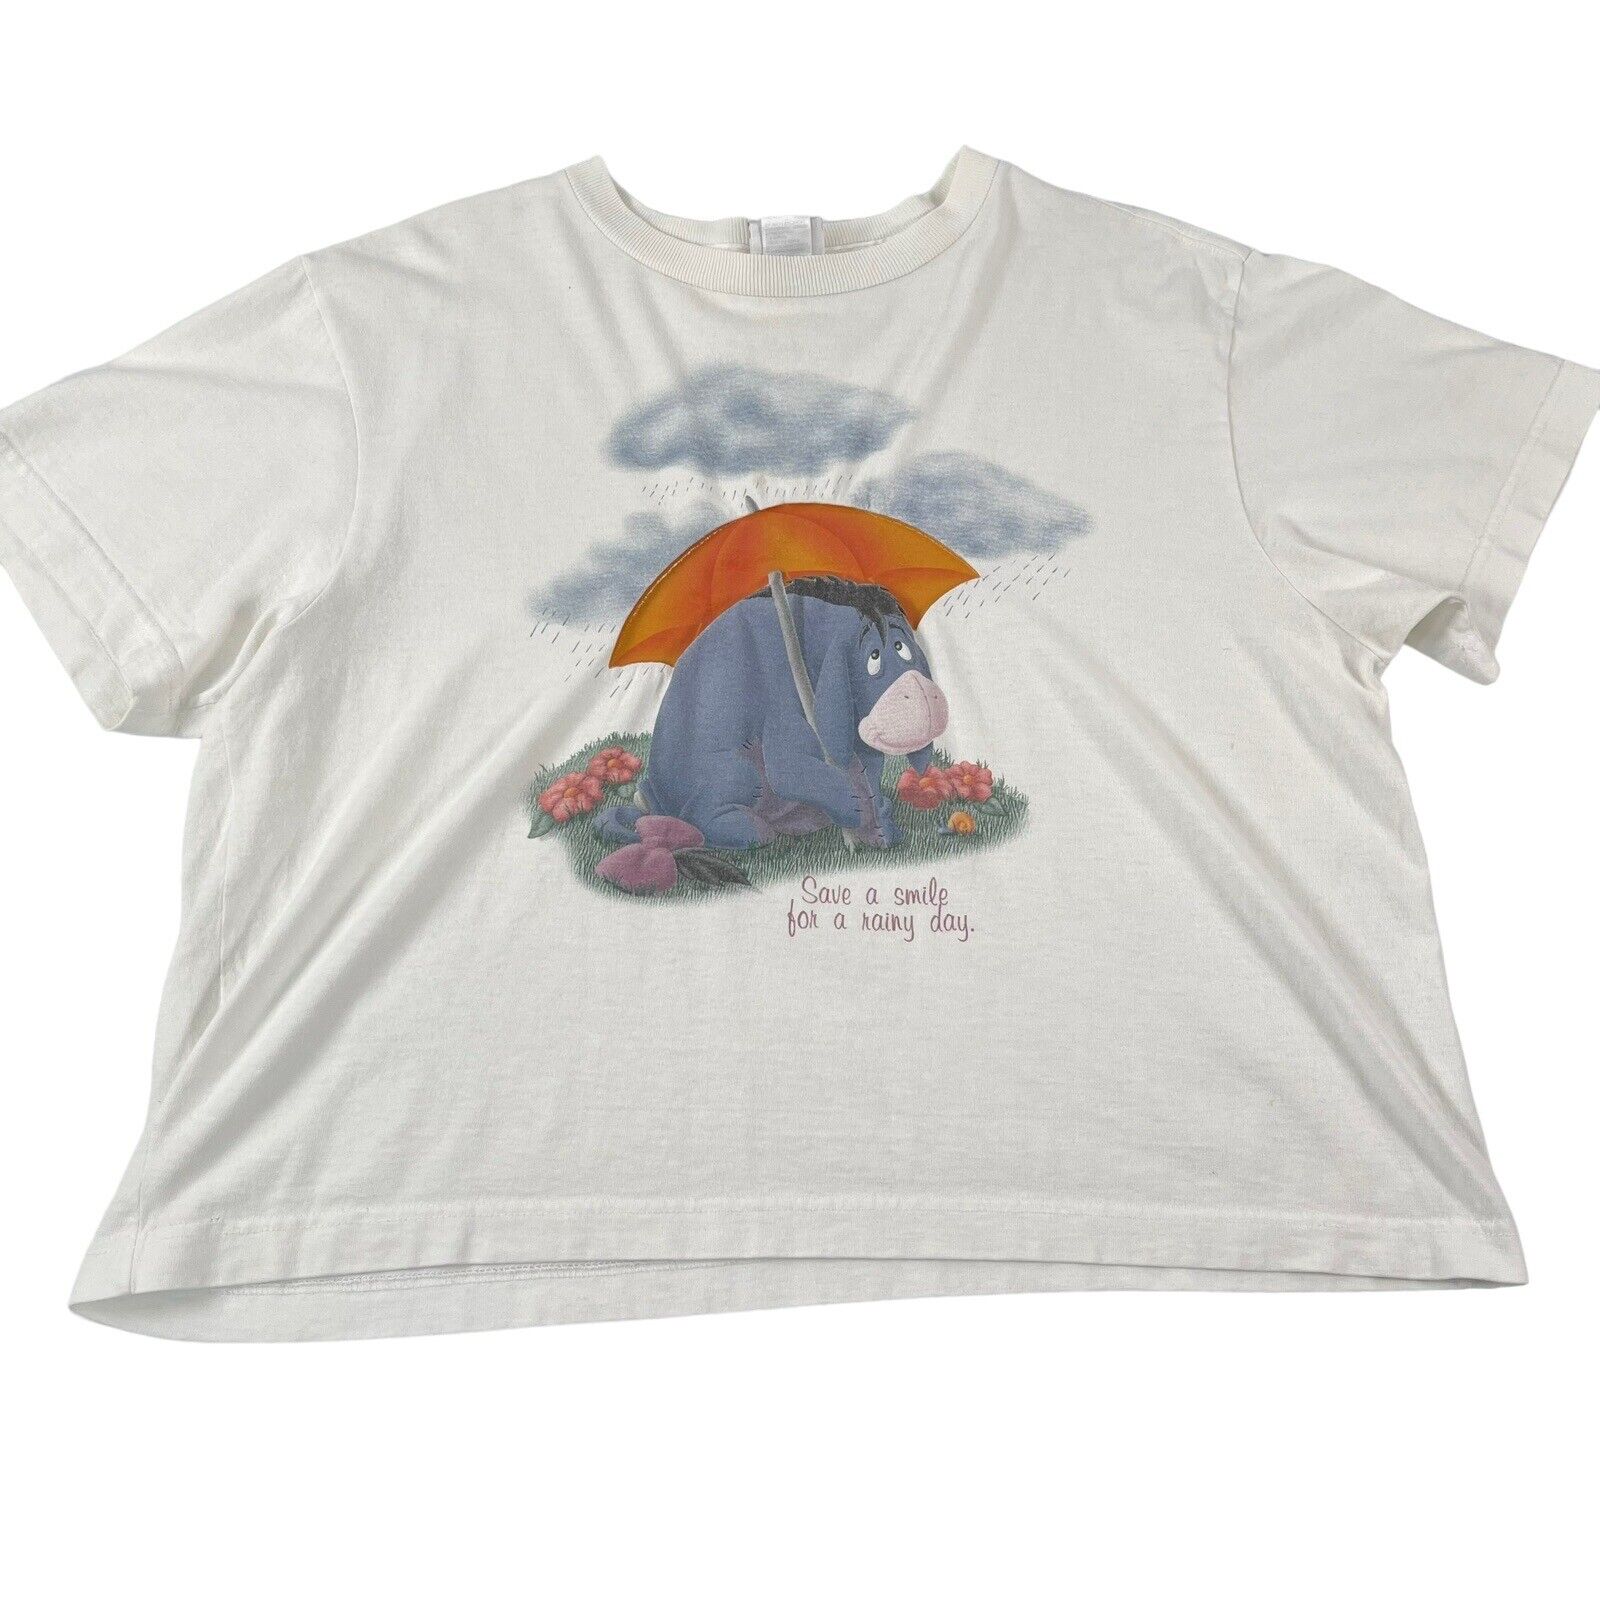 Disney Store Eeyore Shirt Save A Smile for Rainy Day Adult Size Large Vintage